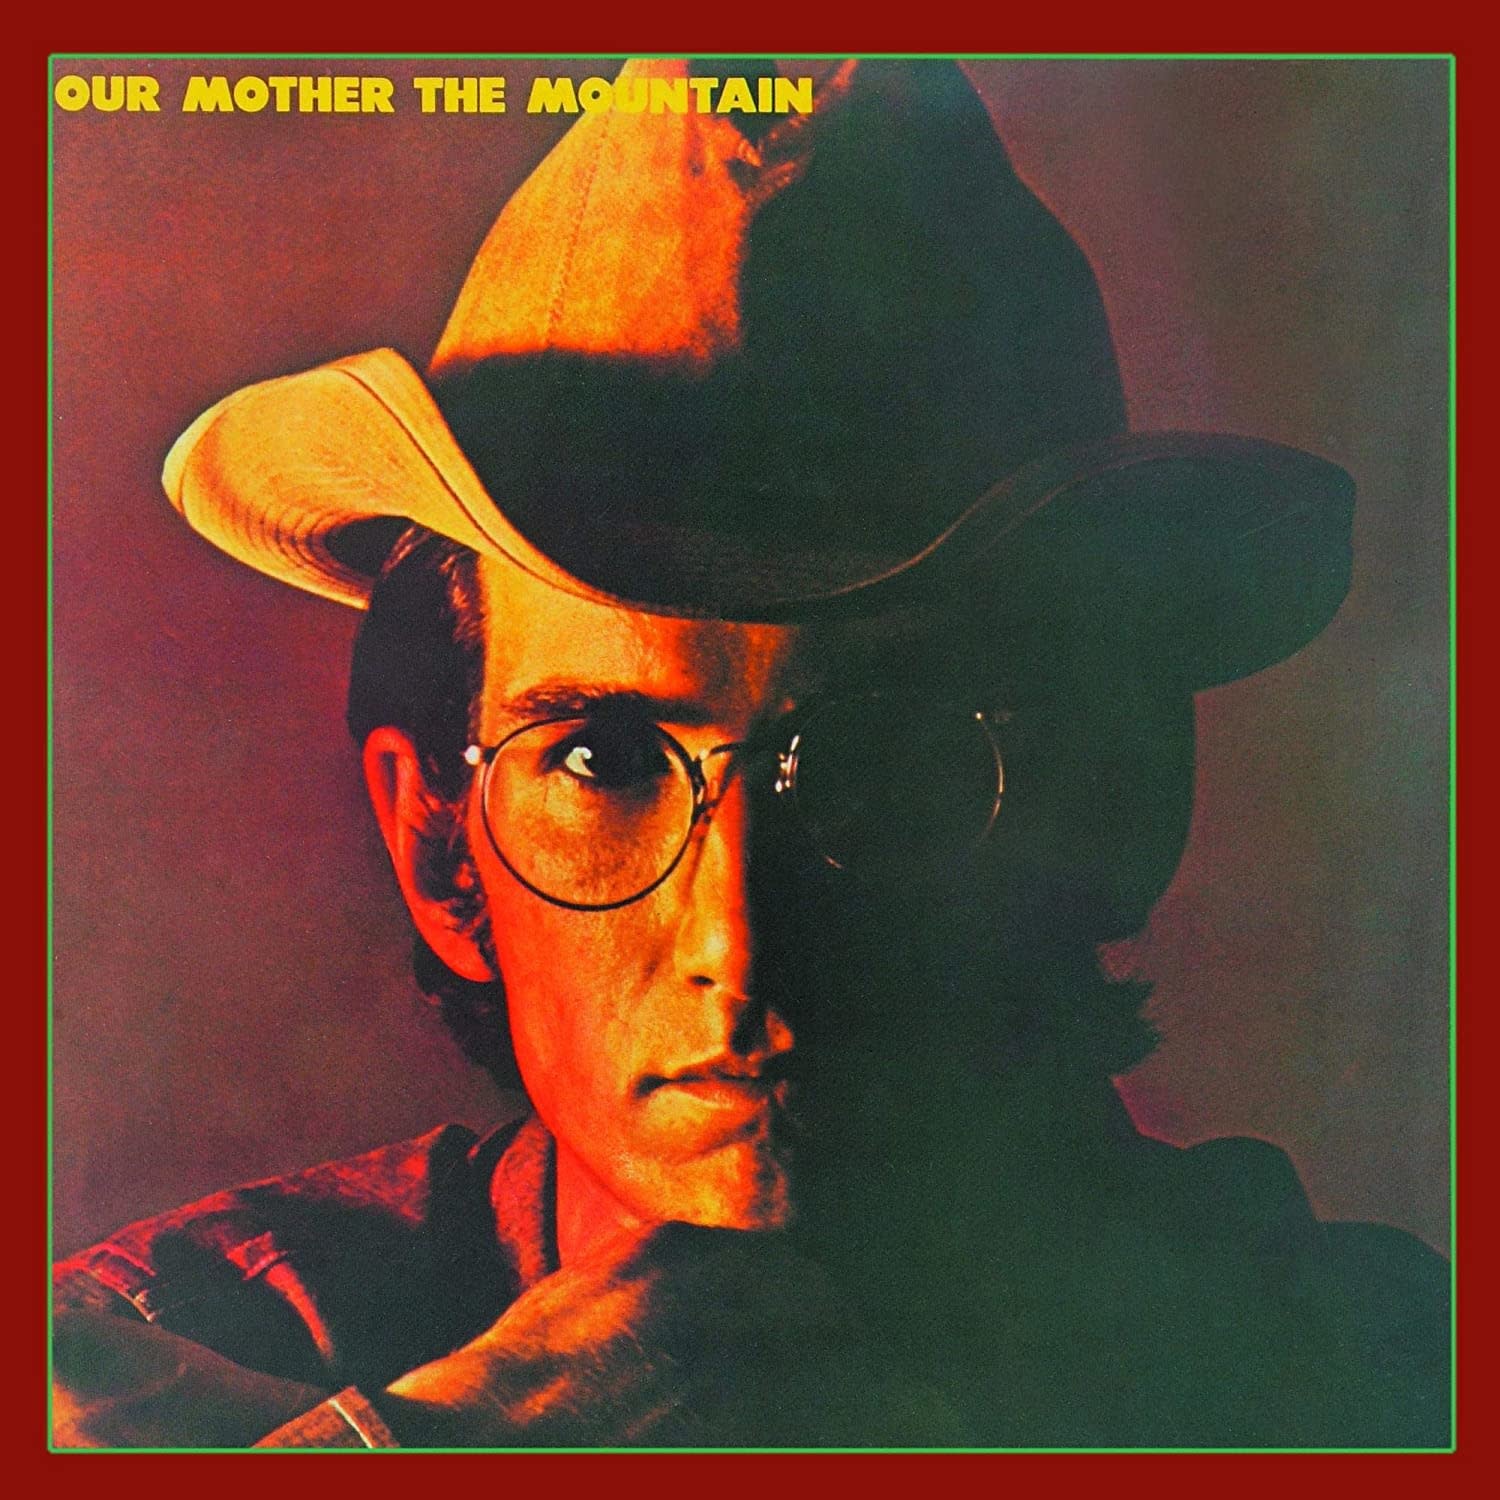 Townes Van Zandt – Our Mother The Mountain